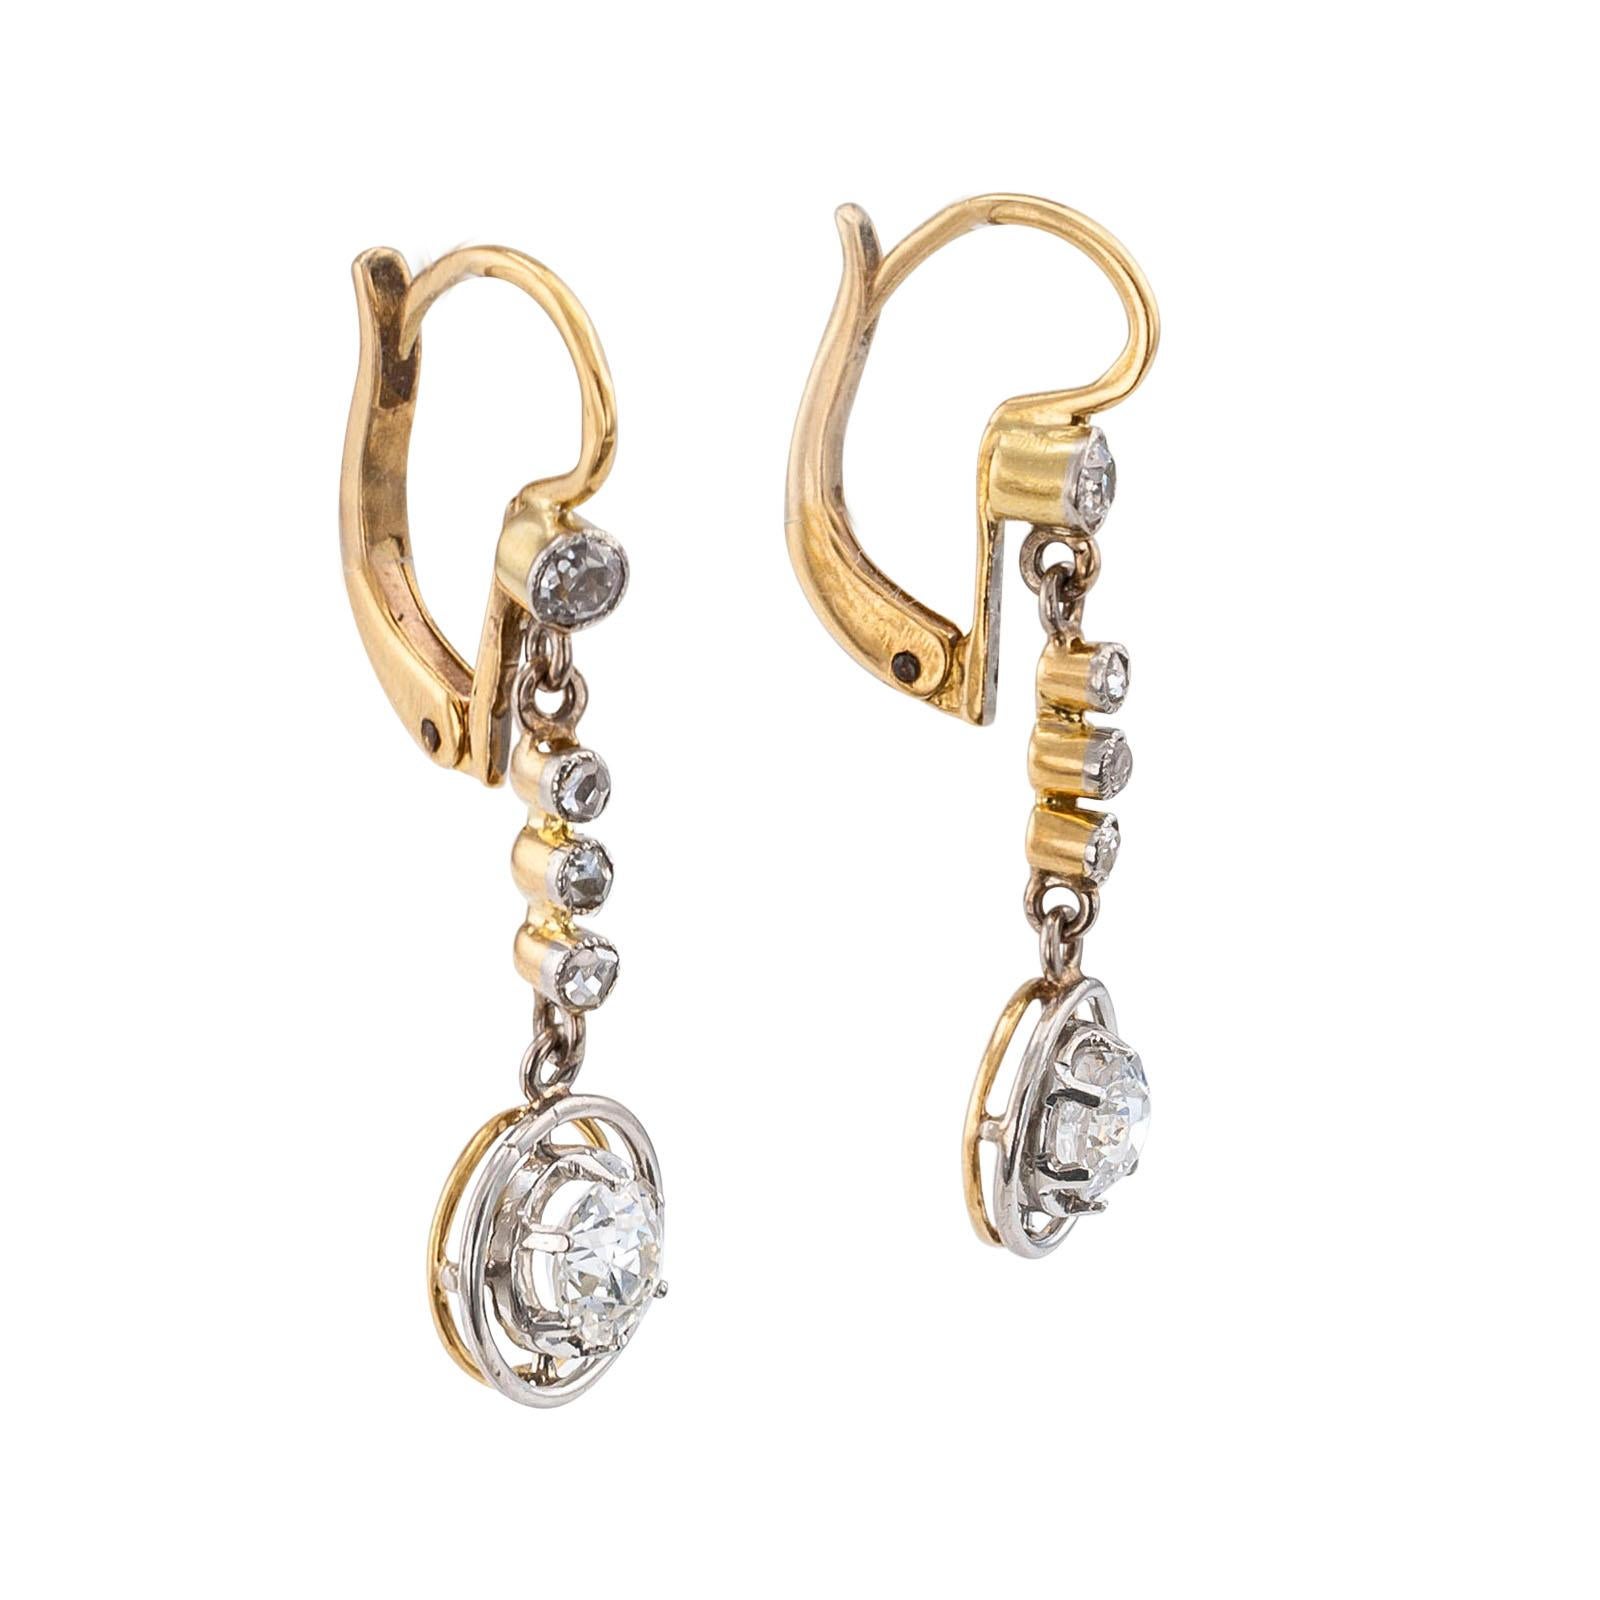 Art Deco diamond drop earrings.
DETAILS:
Art Deco diamond gold and platinum drop earrings circa 1930.
DIAMONDS: two old European-cut diamonds together weighing approximately 0.60 carat, approximately H – J color and VS – SI clarity, two smaller old